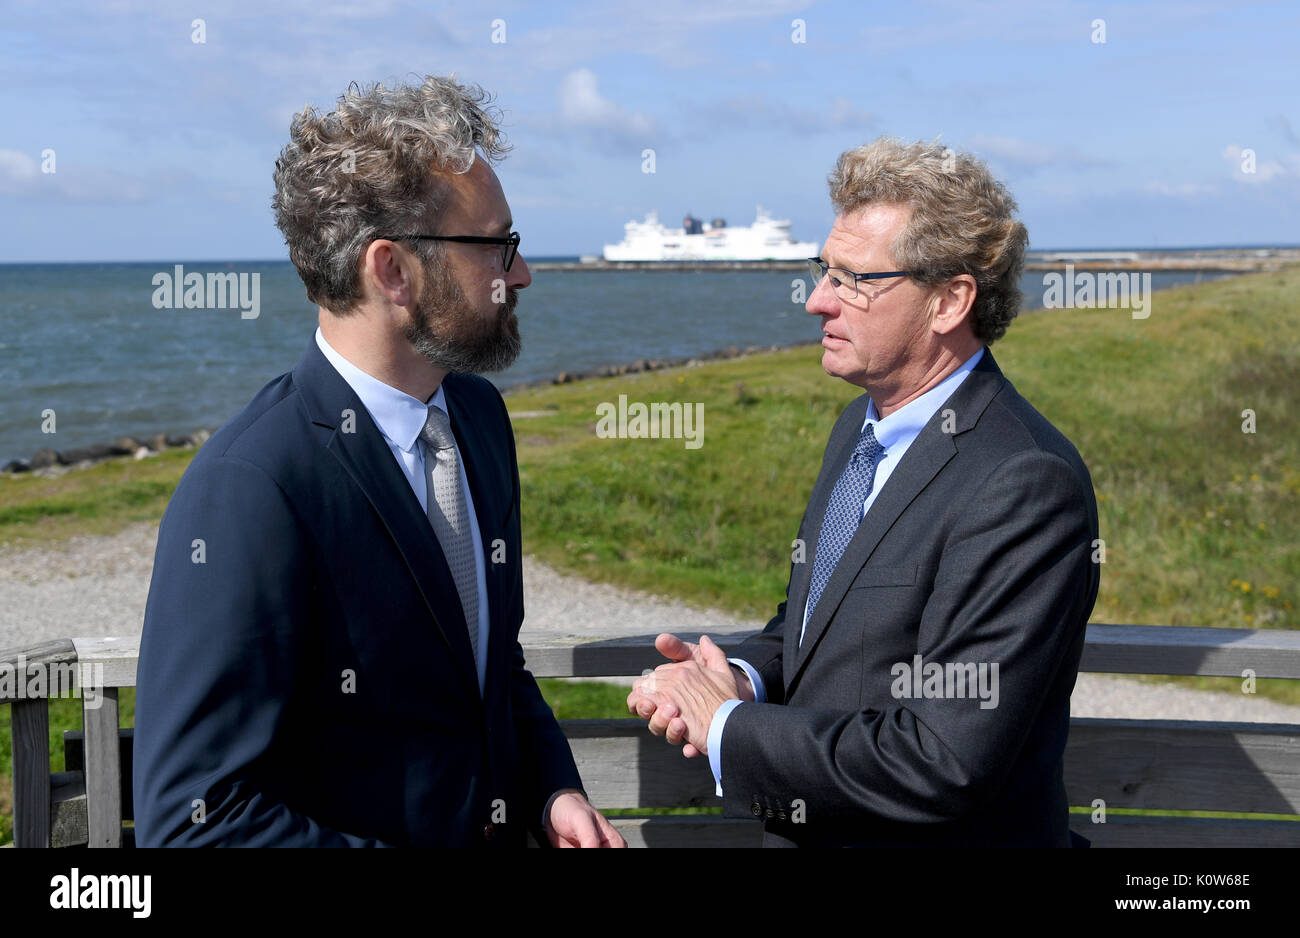 Denmark. 25th August, 2017. The Economy Minister of the state of Schleswig-Holstein, Bernd Buchholz (R), speaking with his Danish counterpart Ole Birk Olesen (L) in Rødbyhavn, Denmark, 25 August 2017. The topic of the talks was the future Fehmarnbelt tunnel. Photo: Carsten Rehder/dpa/Alamy Live News Stock Photo